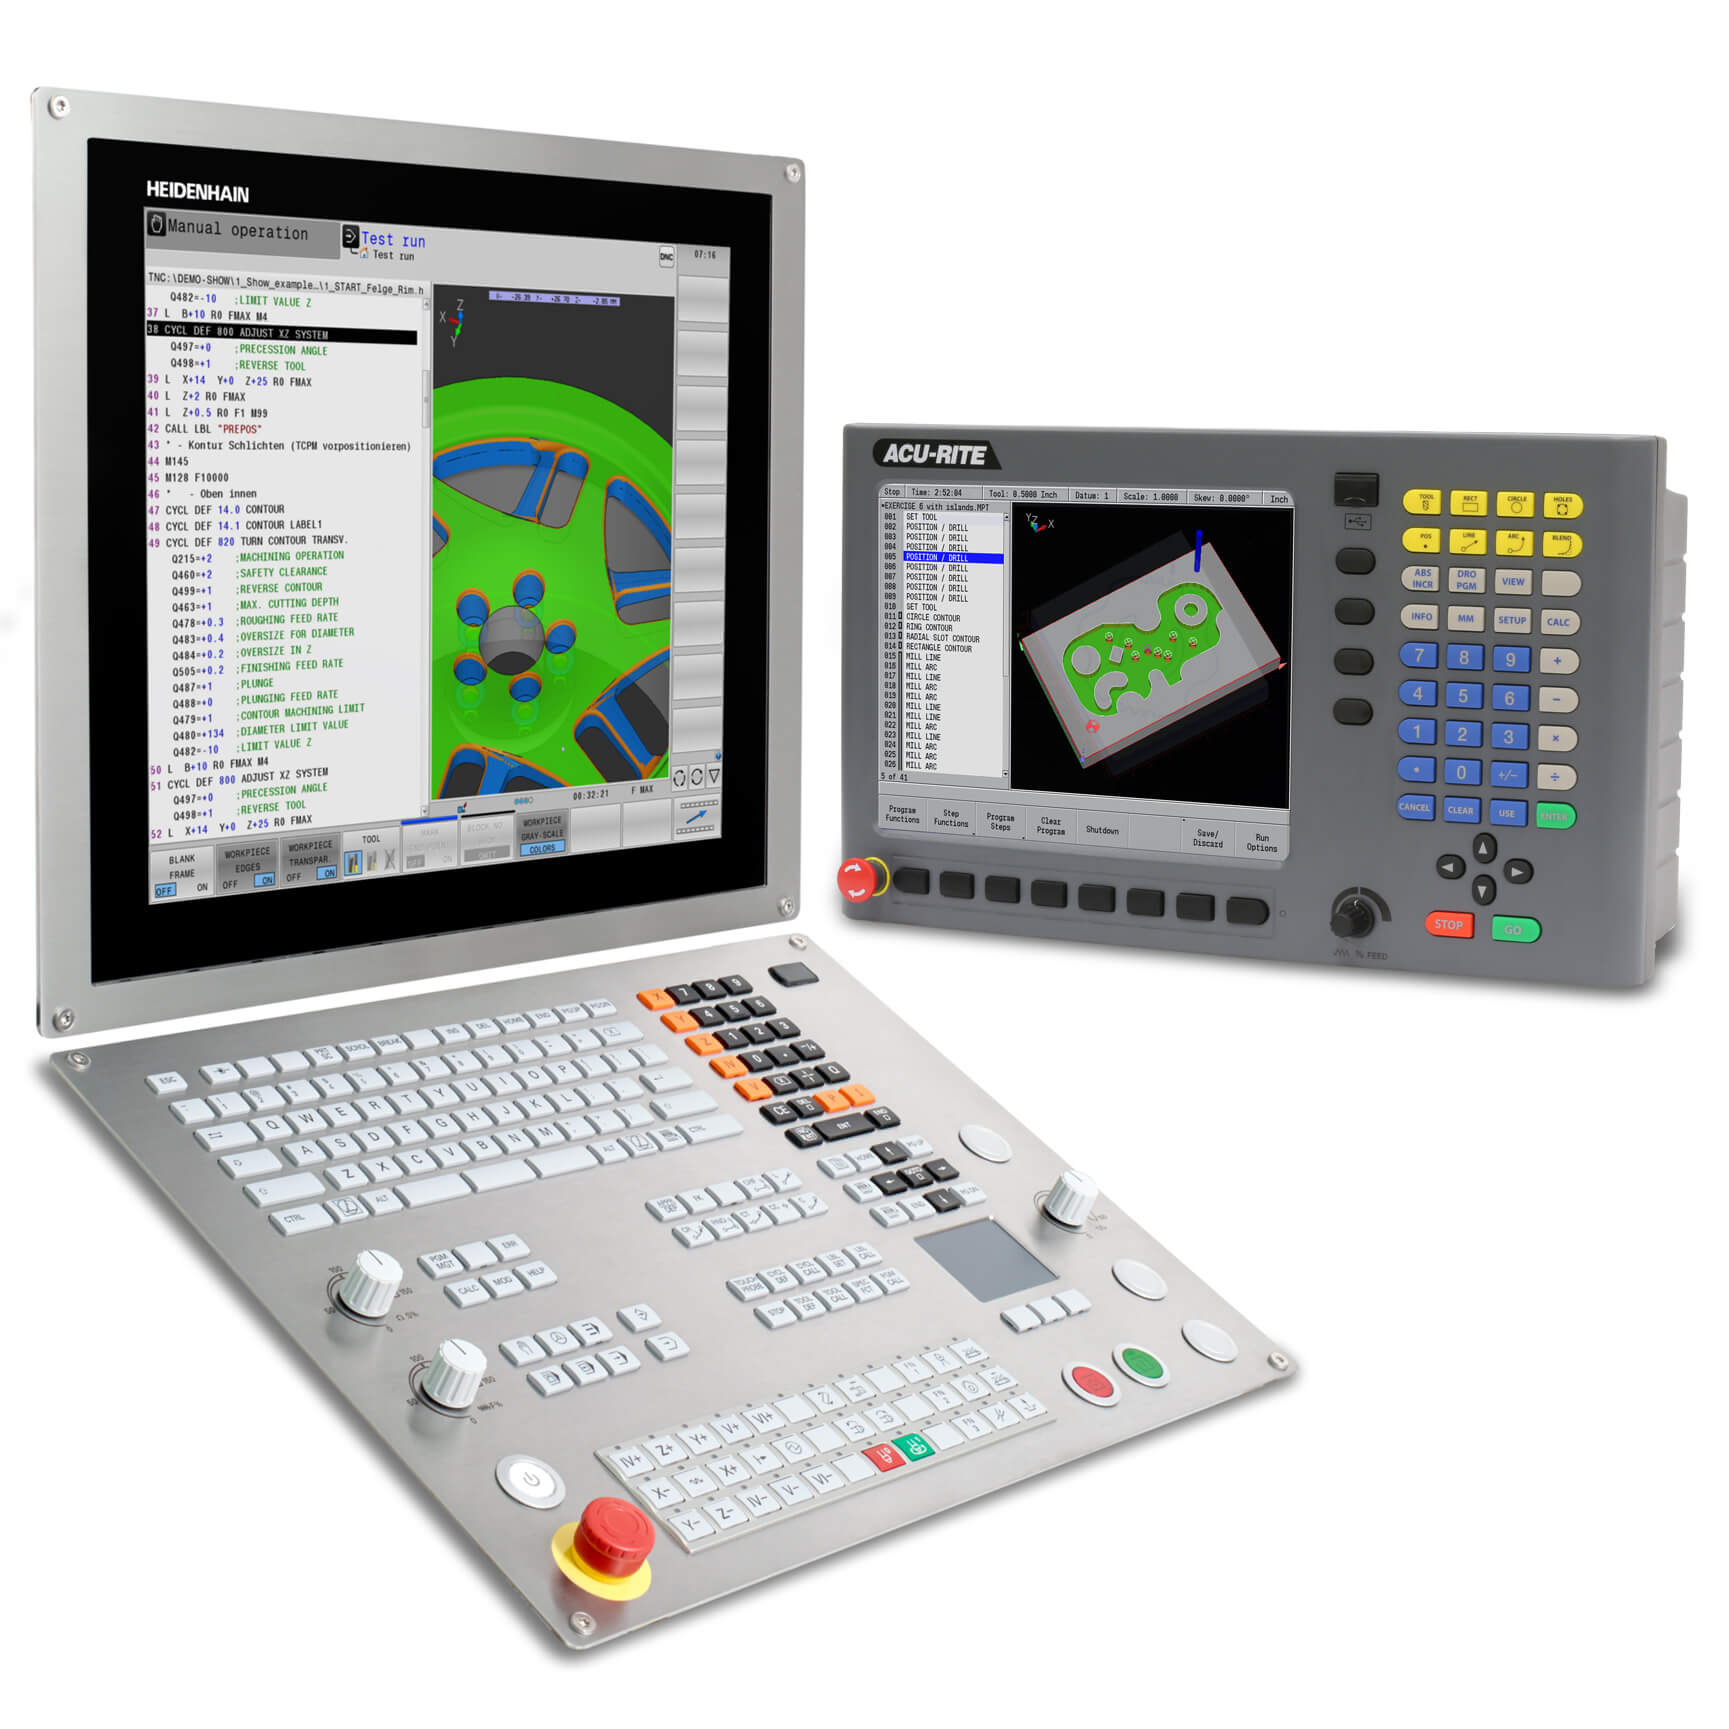 HEIDENHAIN's TNC 640 and ACU-RITE MILLPWR G2 controls will be on display live at EASTEC and SOUTHTEC trade shows in October 2021.